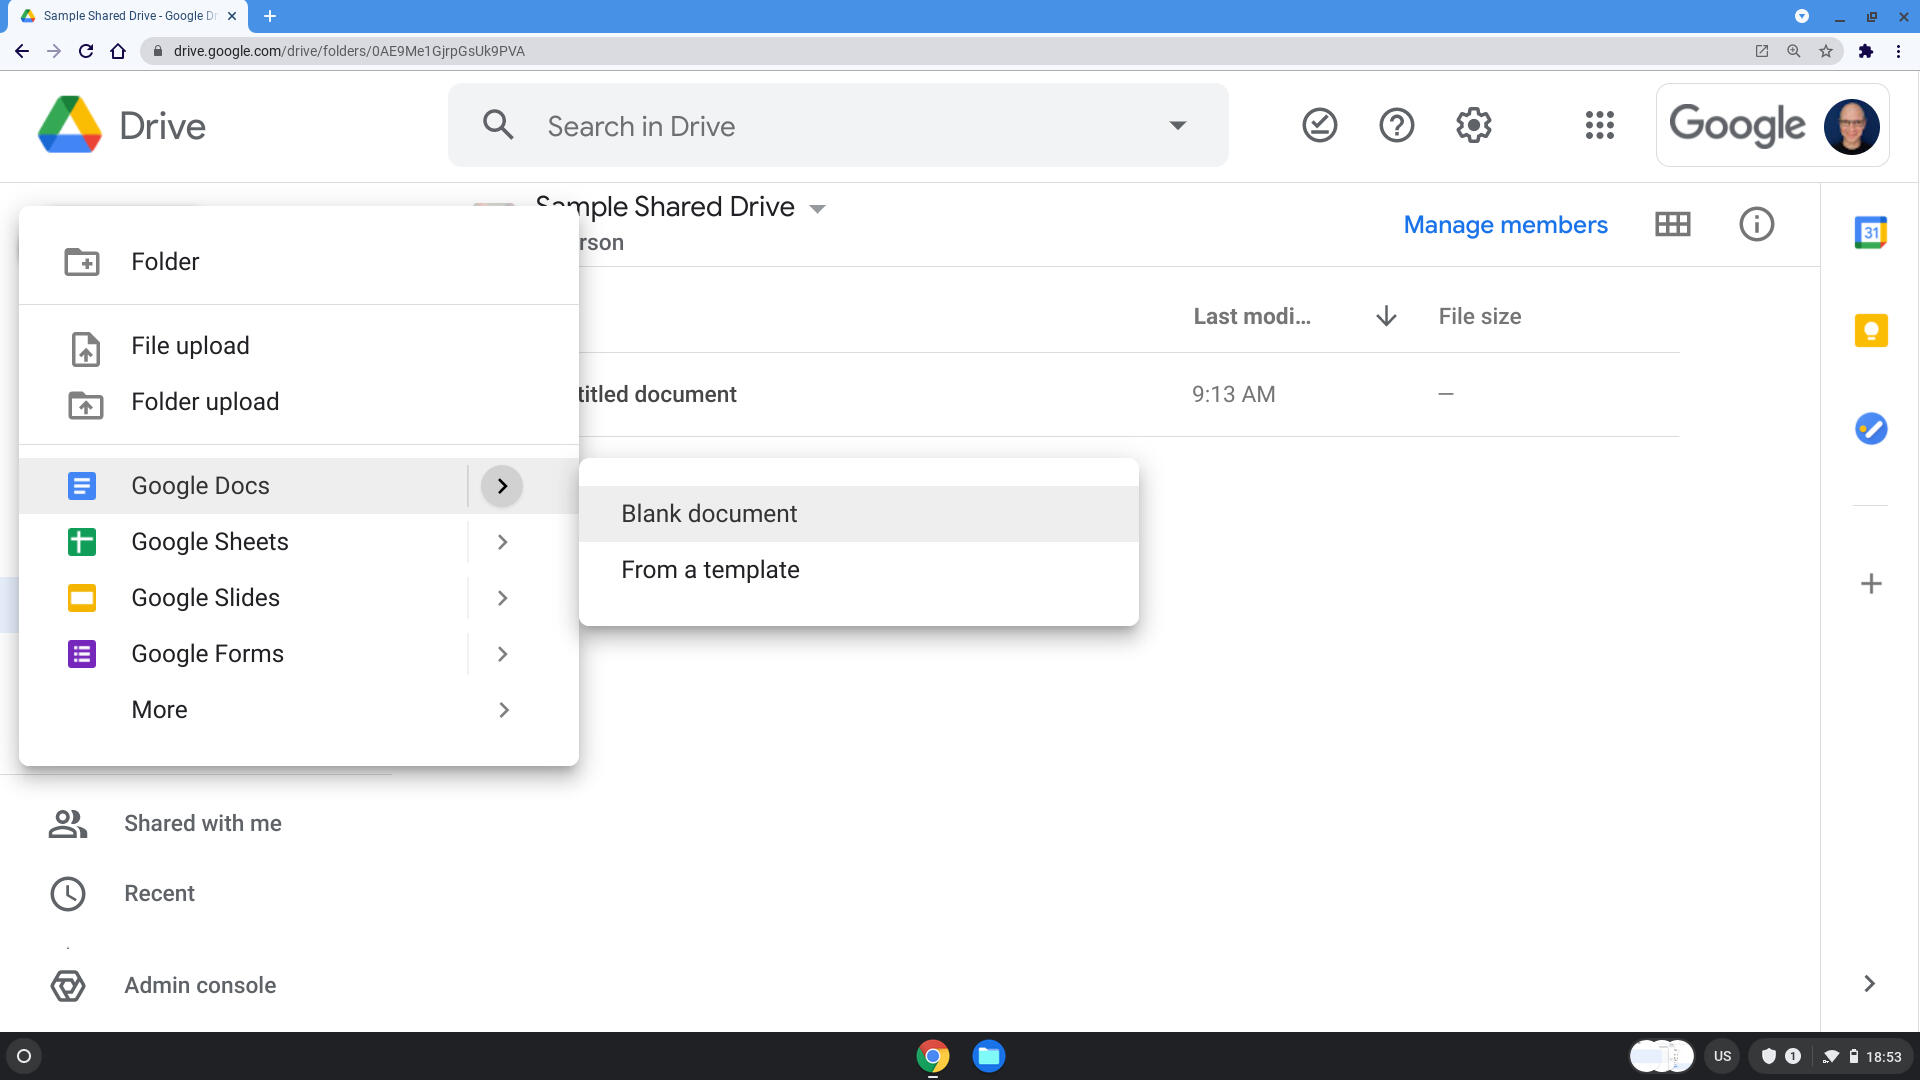 Screenshot of Google Drive in Chrome, open to a Shared drive, just after the +New button has been selected. Menu of options displays: +Folder, File upload, Folder upload, Google Docs - Blank document option highlighted, signaling a new Doc about to be created in the Shared drive.